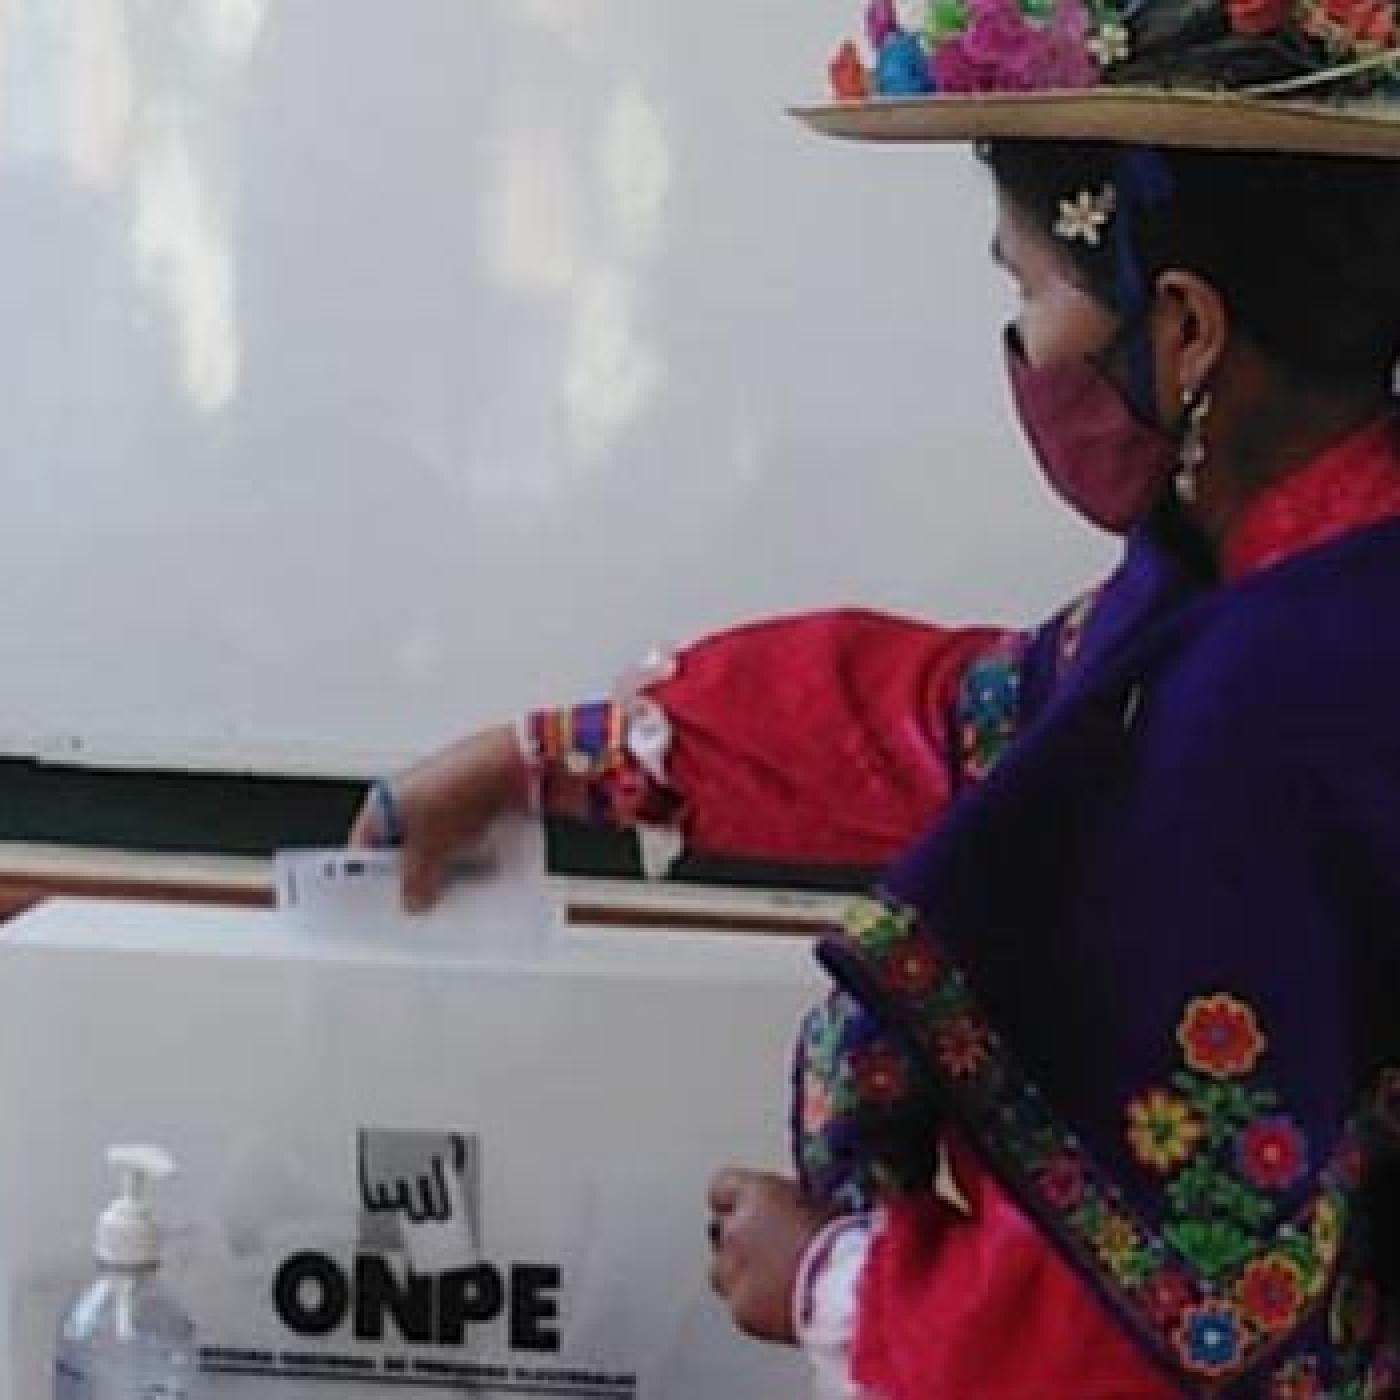 An Indigenous voter casts her ballot during Peru's 2021 elections. © National Office of Electoral Processes 